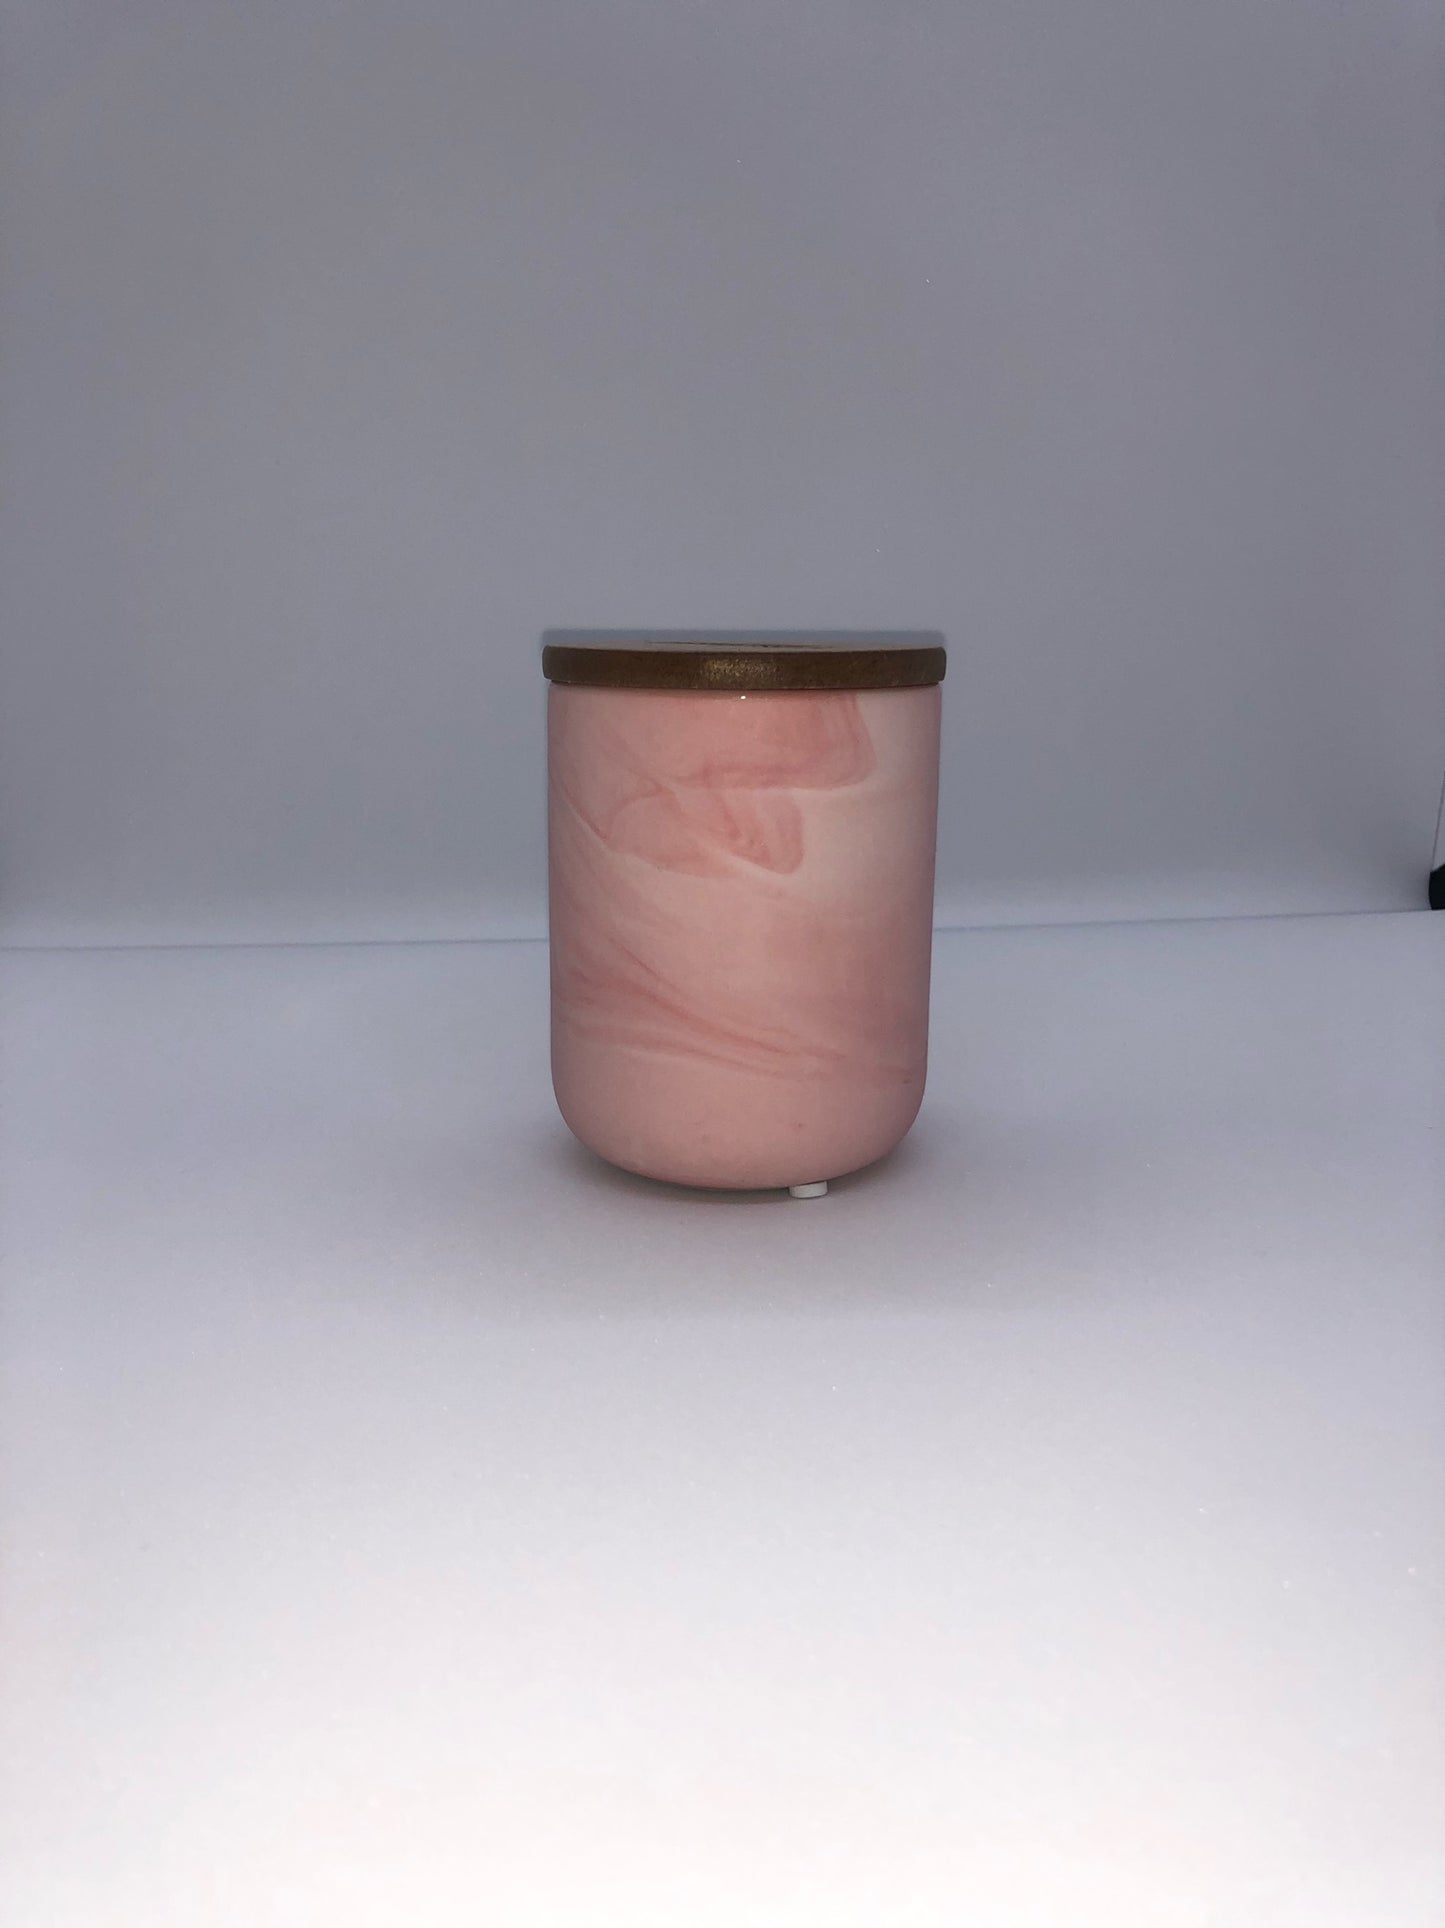 Sydney Candle Co. Cherry Blossom Scented Candles